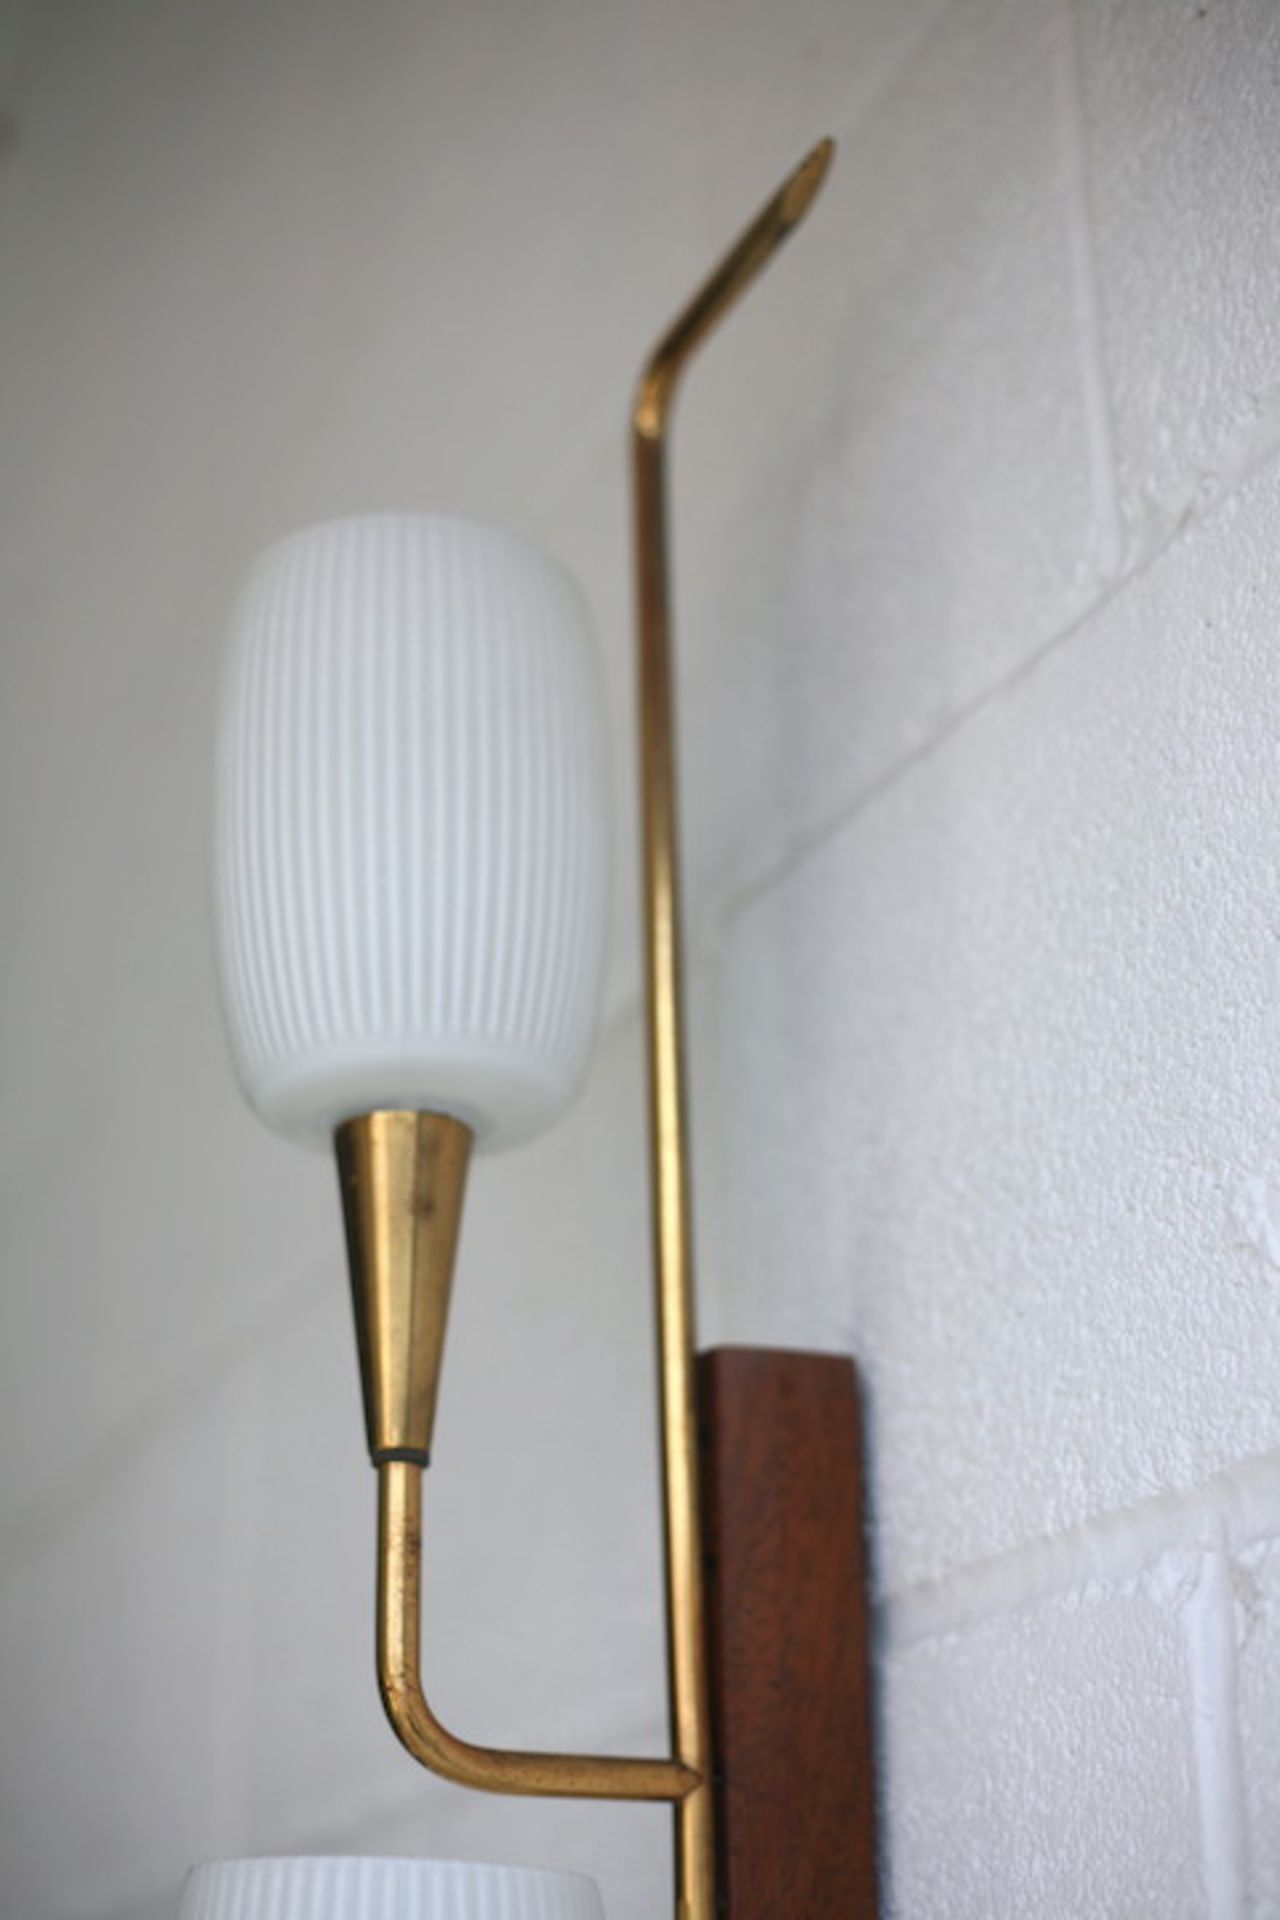 RETRO MID CENTURY 1950s TRIPLE FRENCH WALL LIGHT - Image 3 of 6